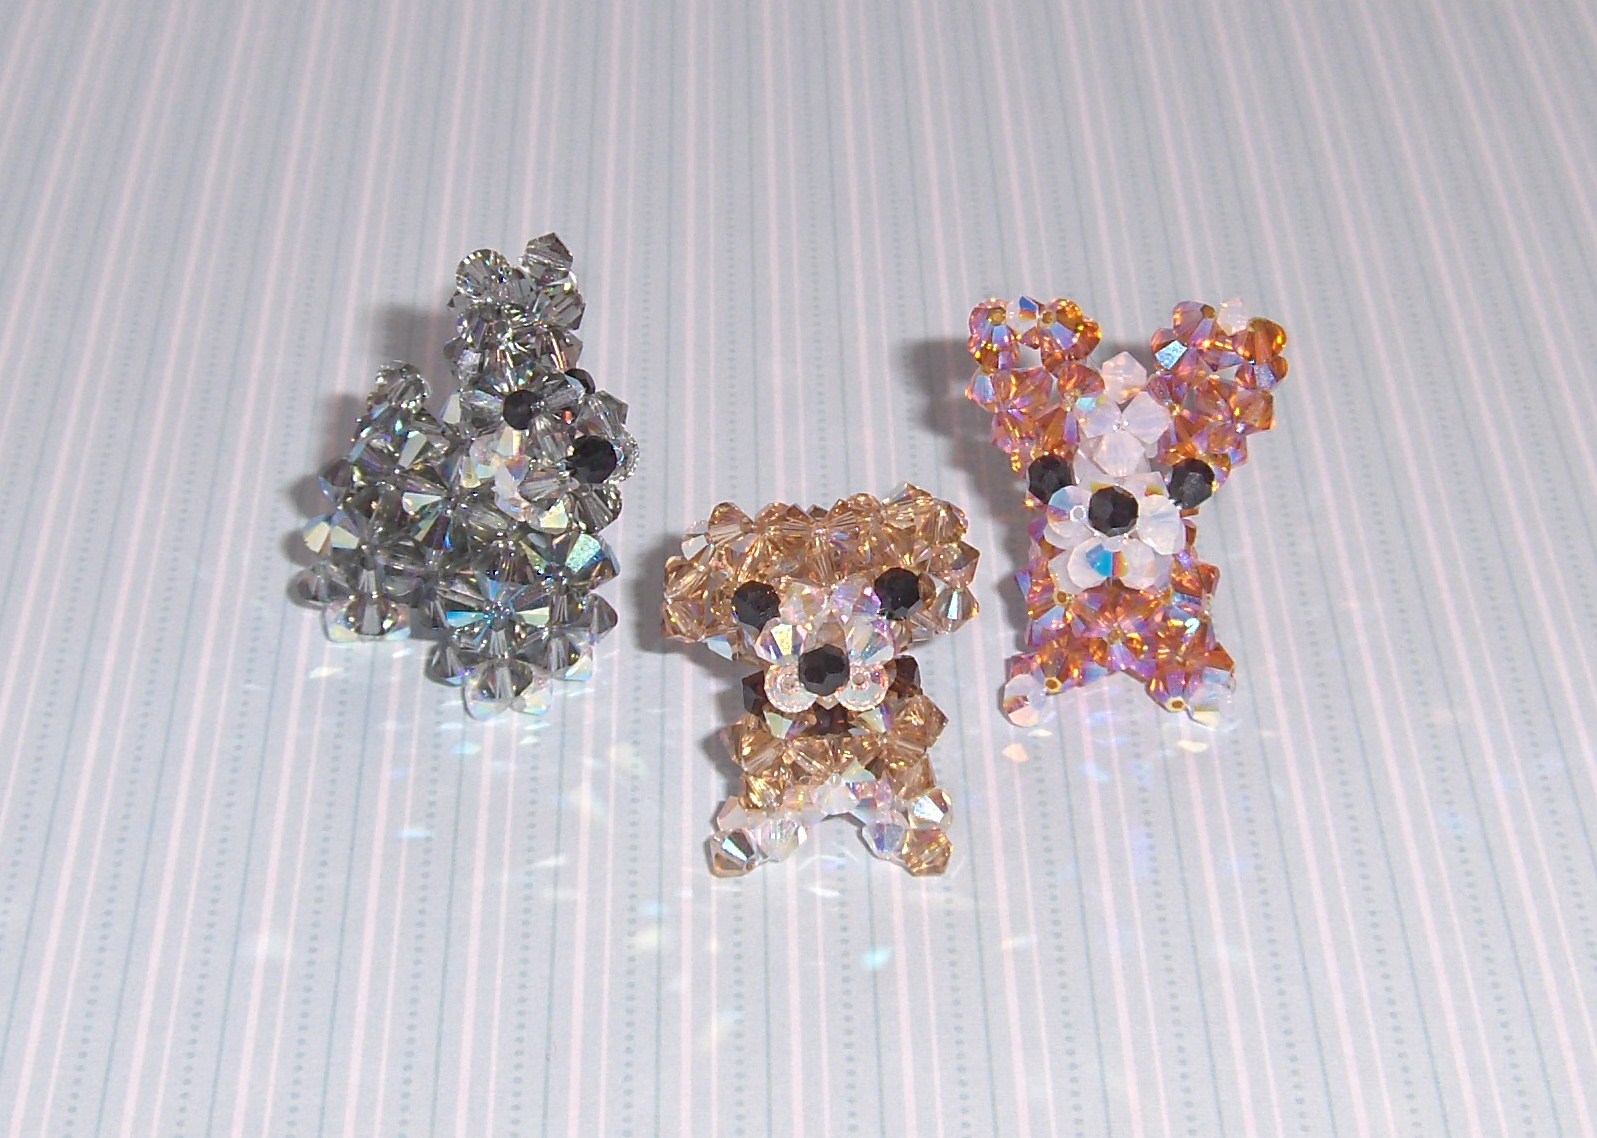 Instructions on Japanese-Style 3D Crystal Beaded Animals | eHow.com